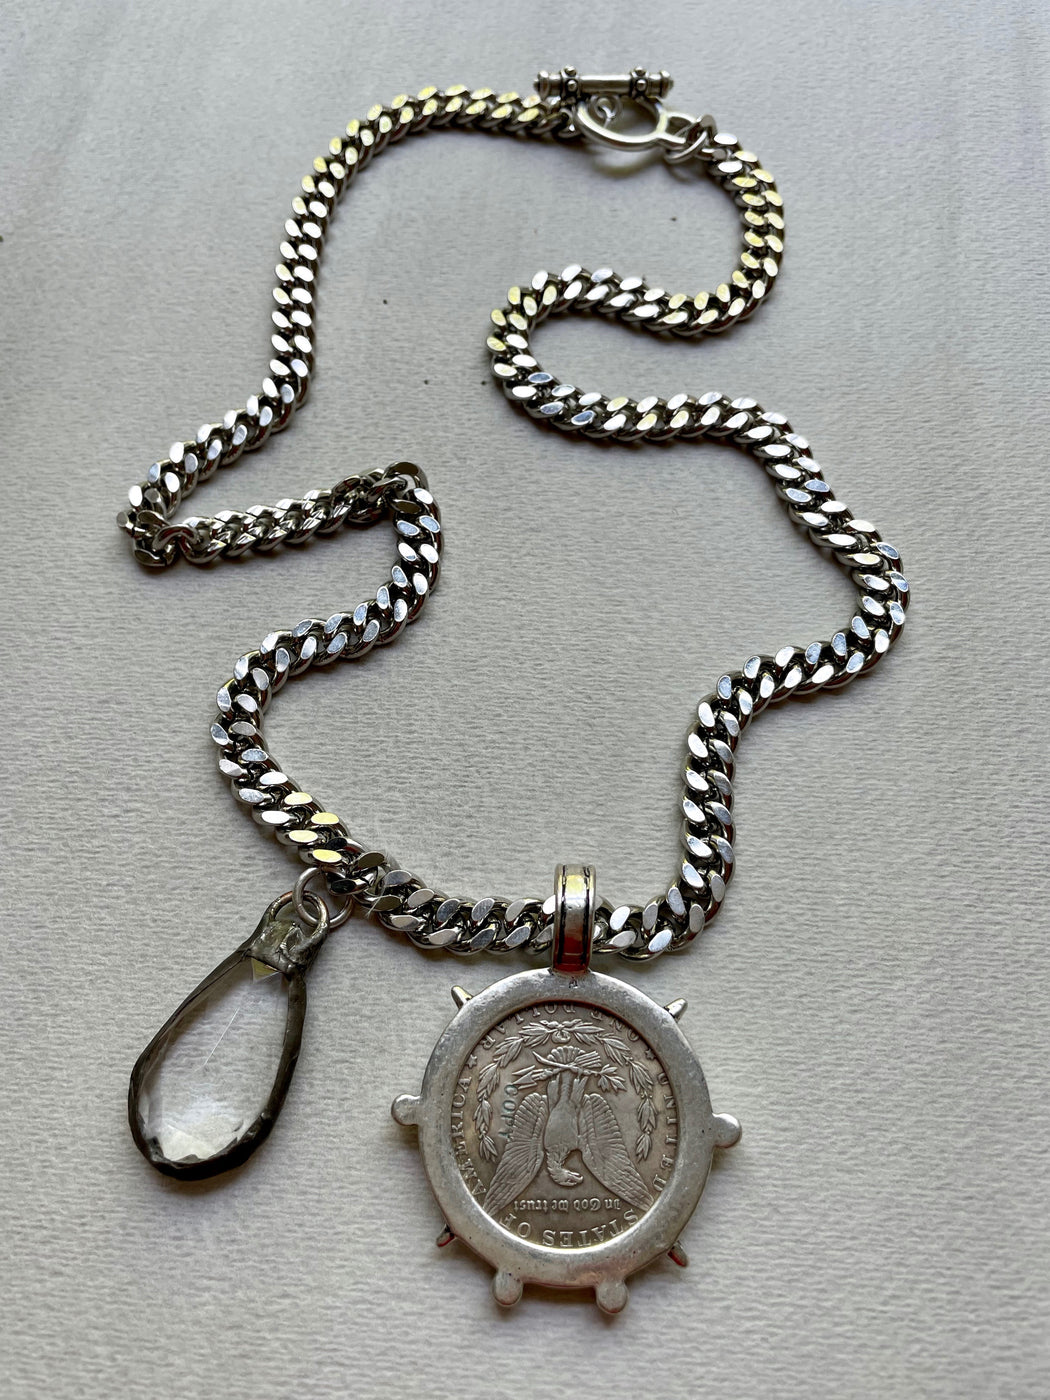 Vintage "Silver Dollar" Necklace by Meredith Waterstraat